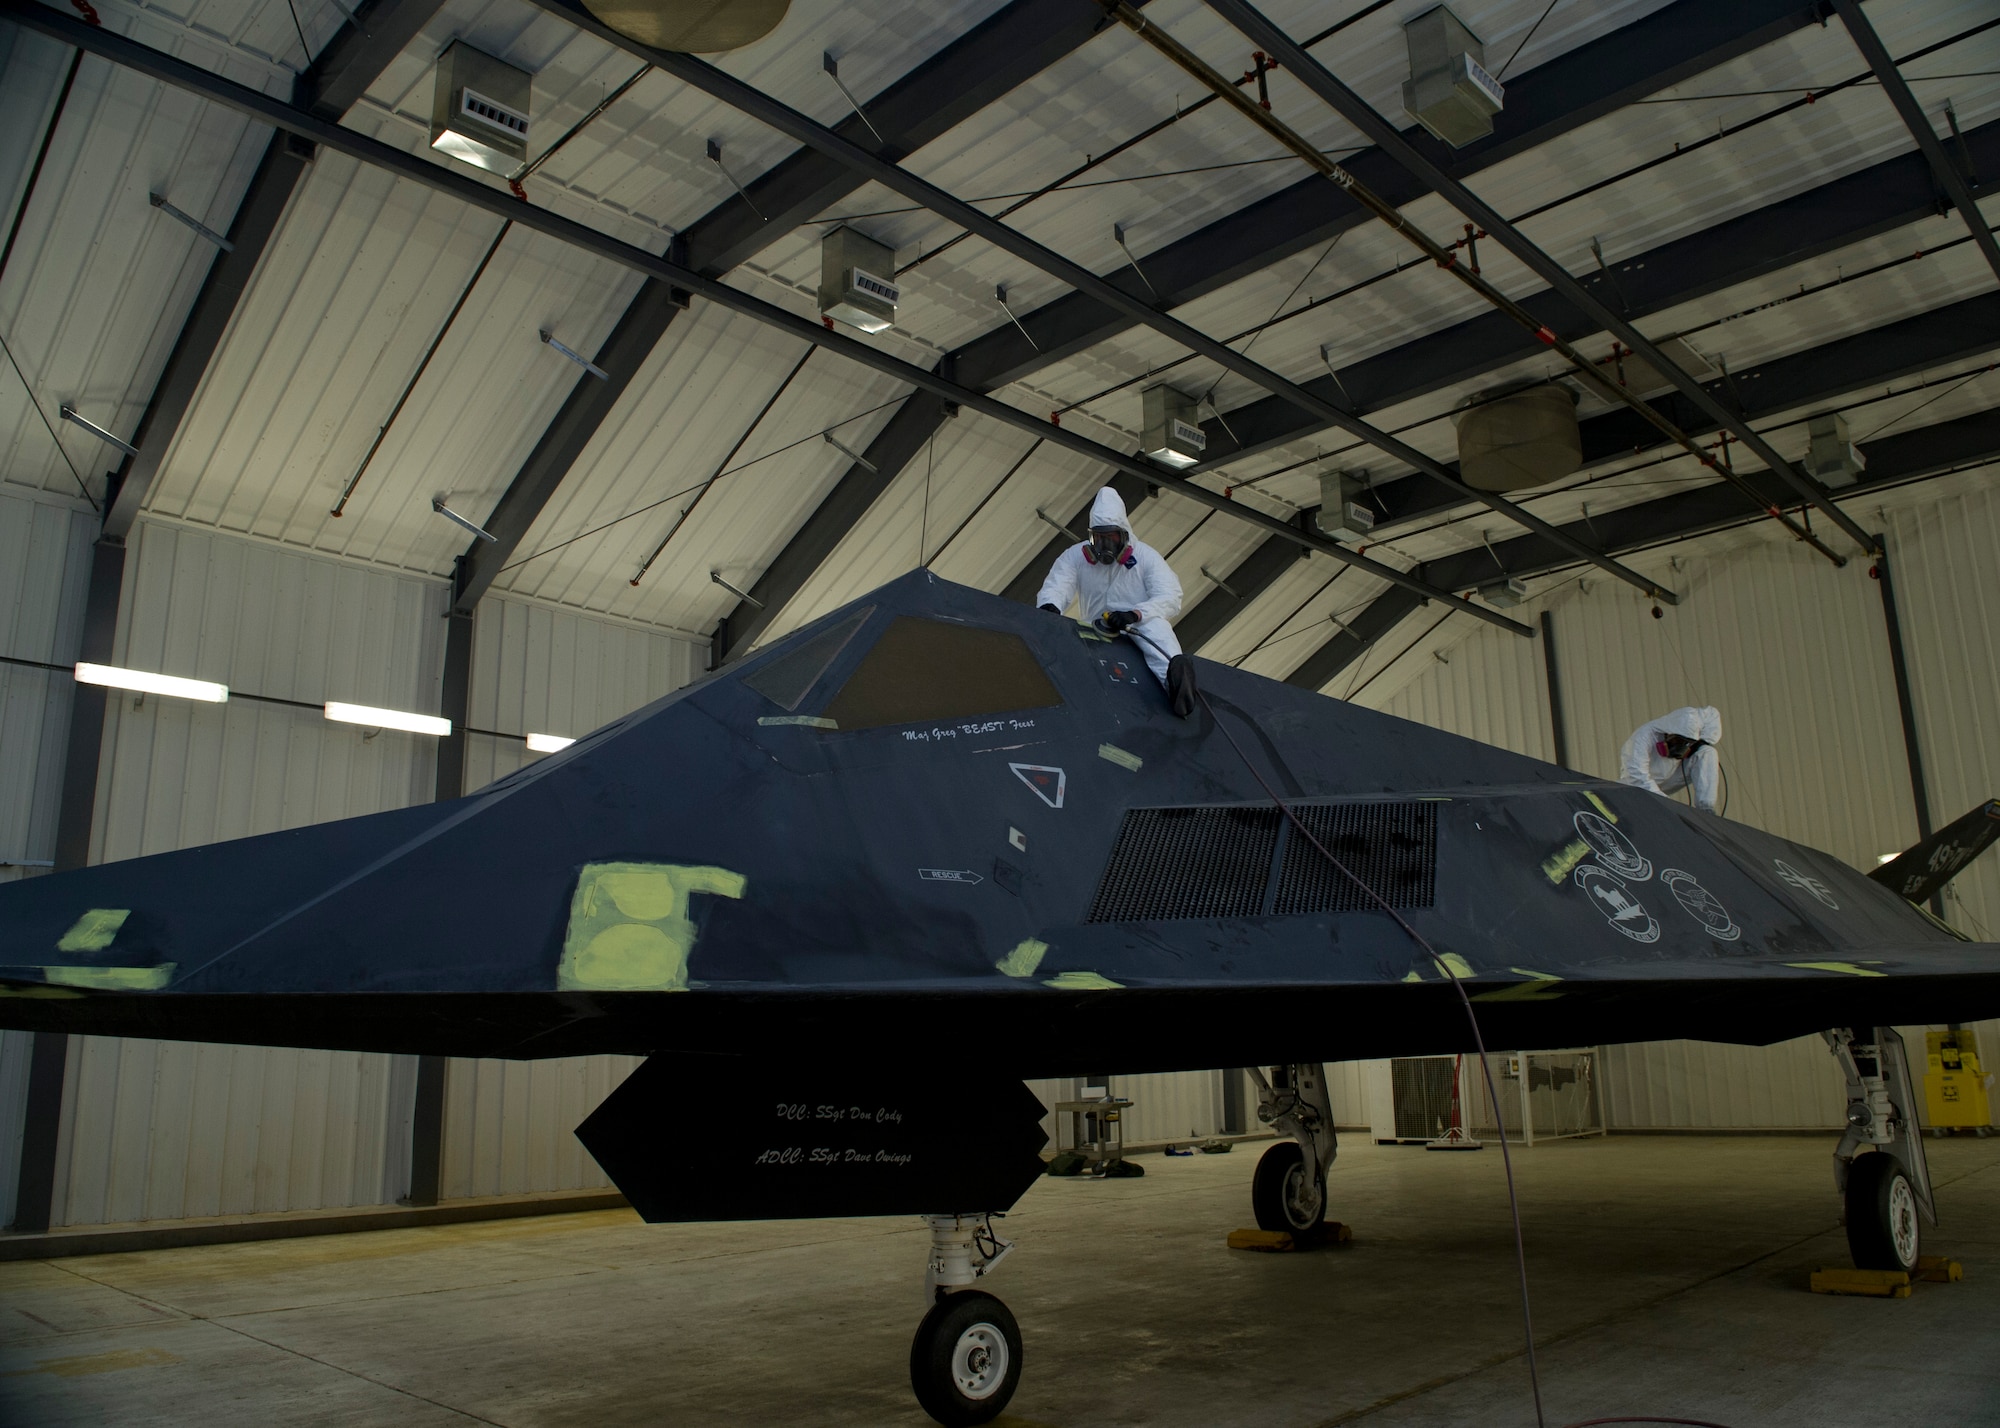 Senior Airmen Micheal Leroy  and Trevor Mendez of the 49th Maintenance Squadron, fabrication flight, perform maintenance on the F-117 Nighthawk at Holloman Air Force Base, N.M., March 13. The F-117 has been on static display in Holloman’s Heritage Park since its retirement in 2008. Due to sun and inclement weather damage, the 49 MXS removed and towed the aircraft to the hangar to begin the restoration process. Airmen will perform structural maintenance on the Nighthawk and give the aircraft a fresh paint job before returning it for display in Heritage Park. (U.S. Air Force photo by Airman 1st Class Leah Ferrante/Released)